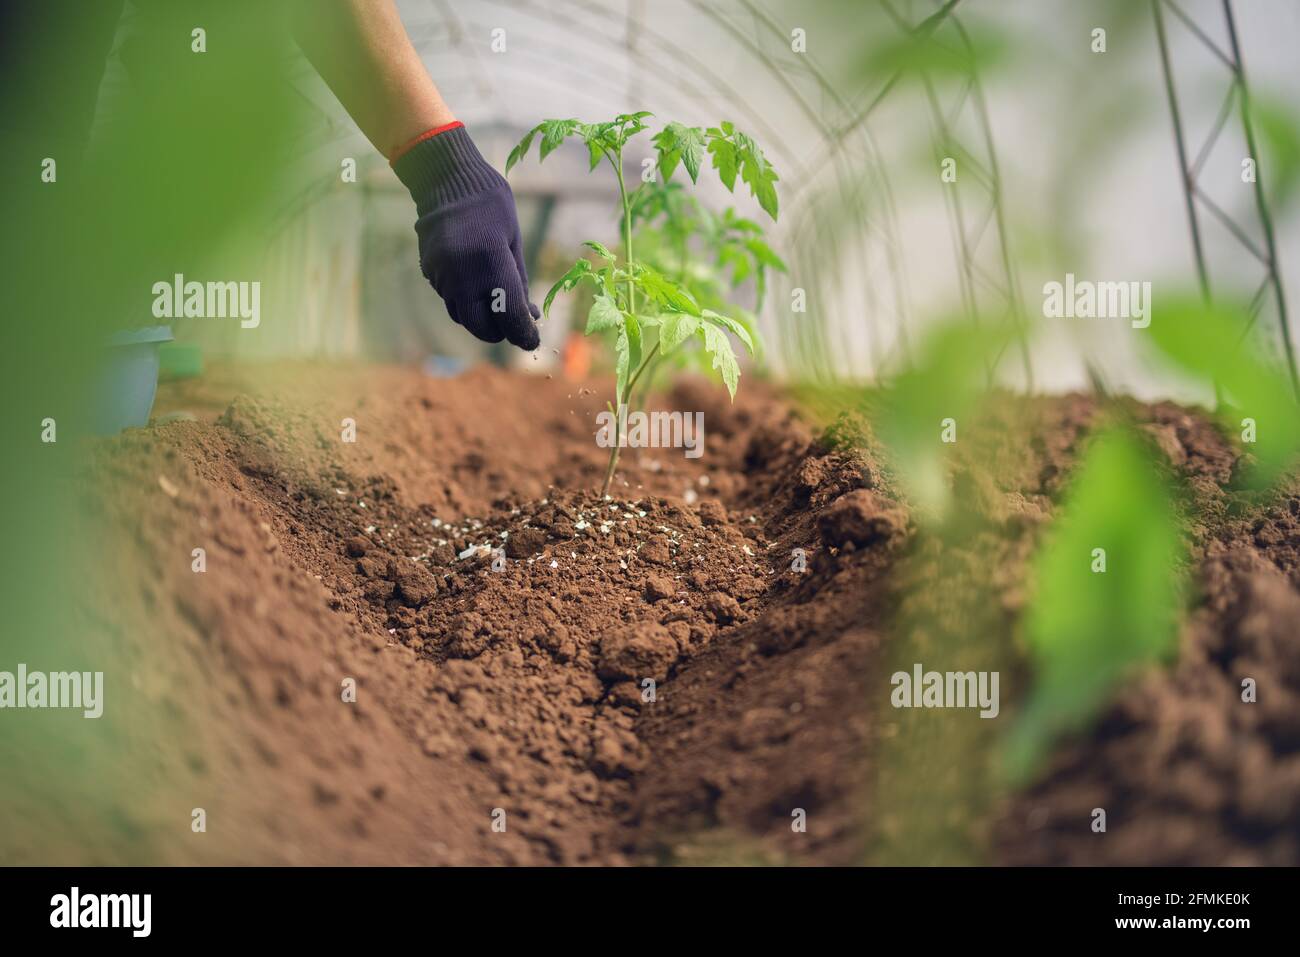 Fertilizing Tomatoes plant in greenhouse, homegrown organic vegetables. Stock Photo